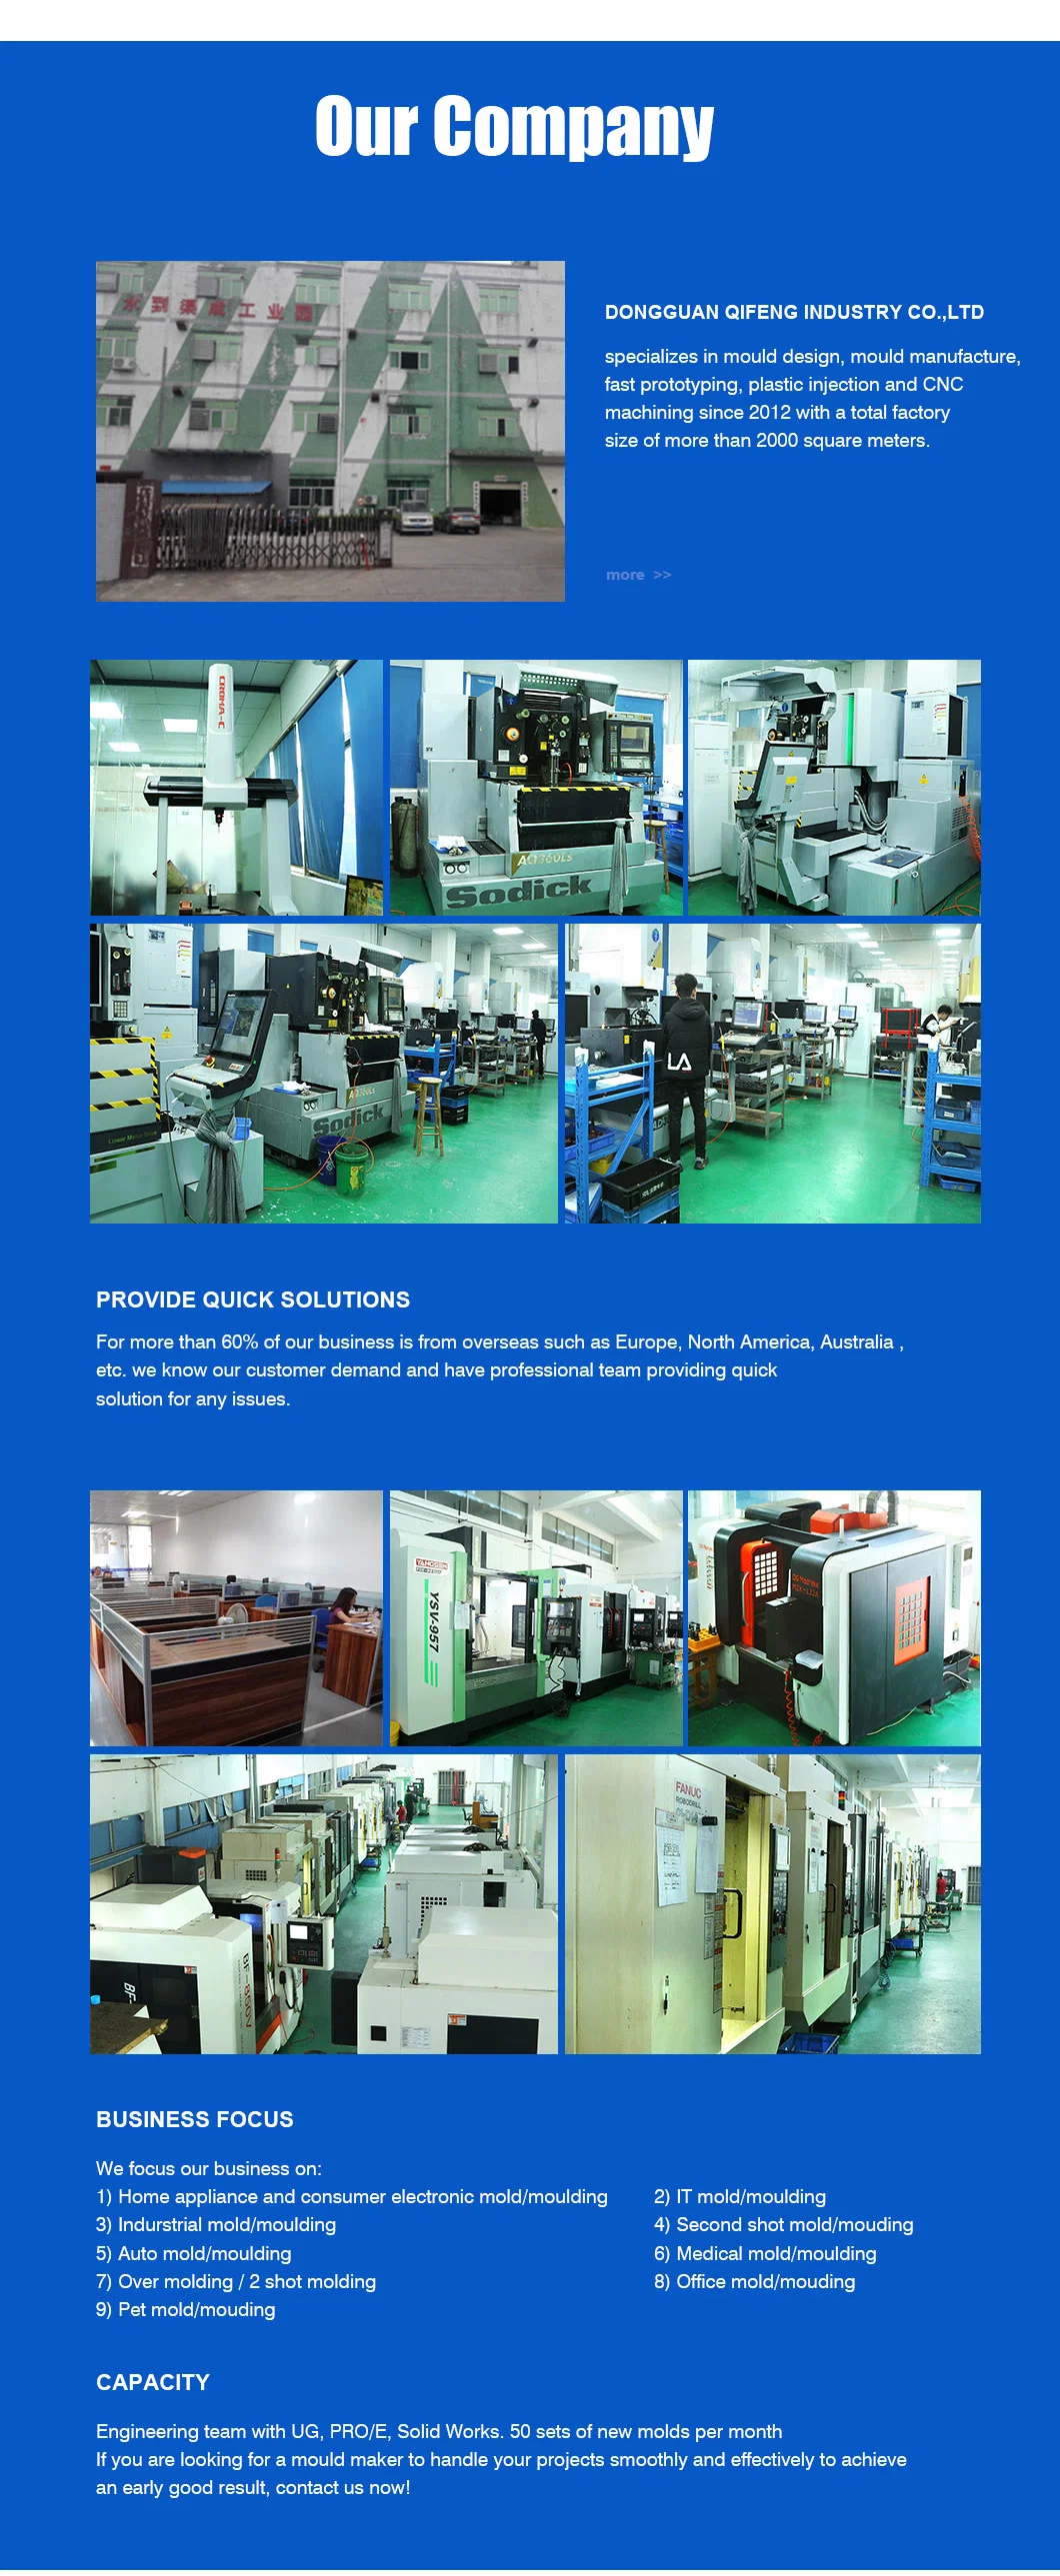 China Dongguan Quality OEM ODM Design High Precision Mould Maker Manufacturer Dual Double Injection Molding Overmolding Insert Molding Factory